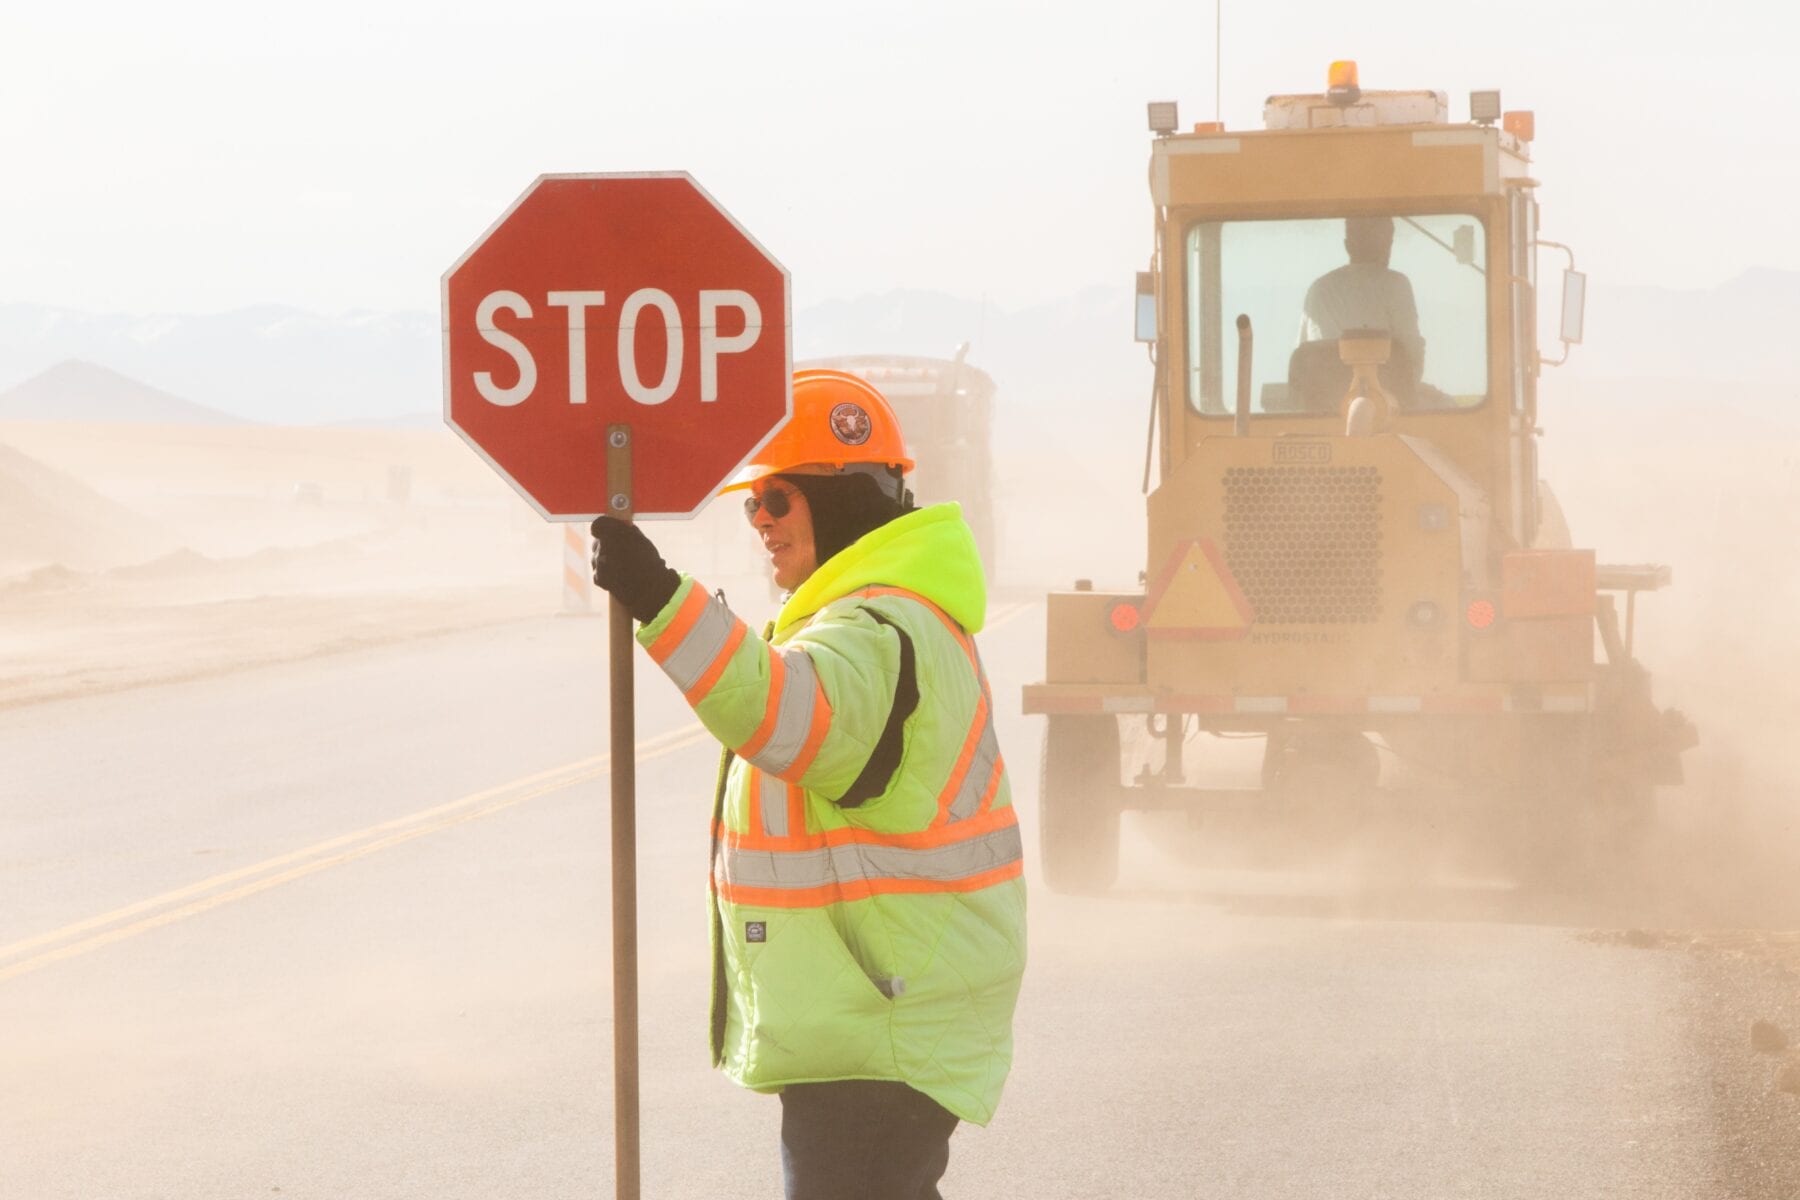 Practice safety in work zones and keep an eye out for construction workers guiding traffic